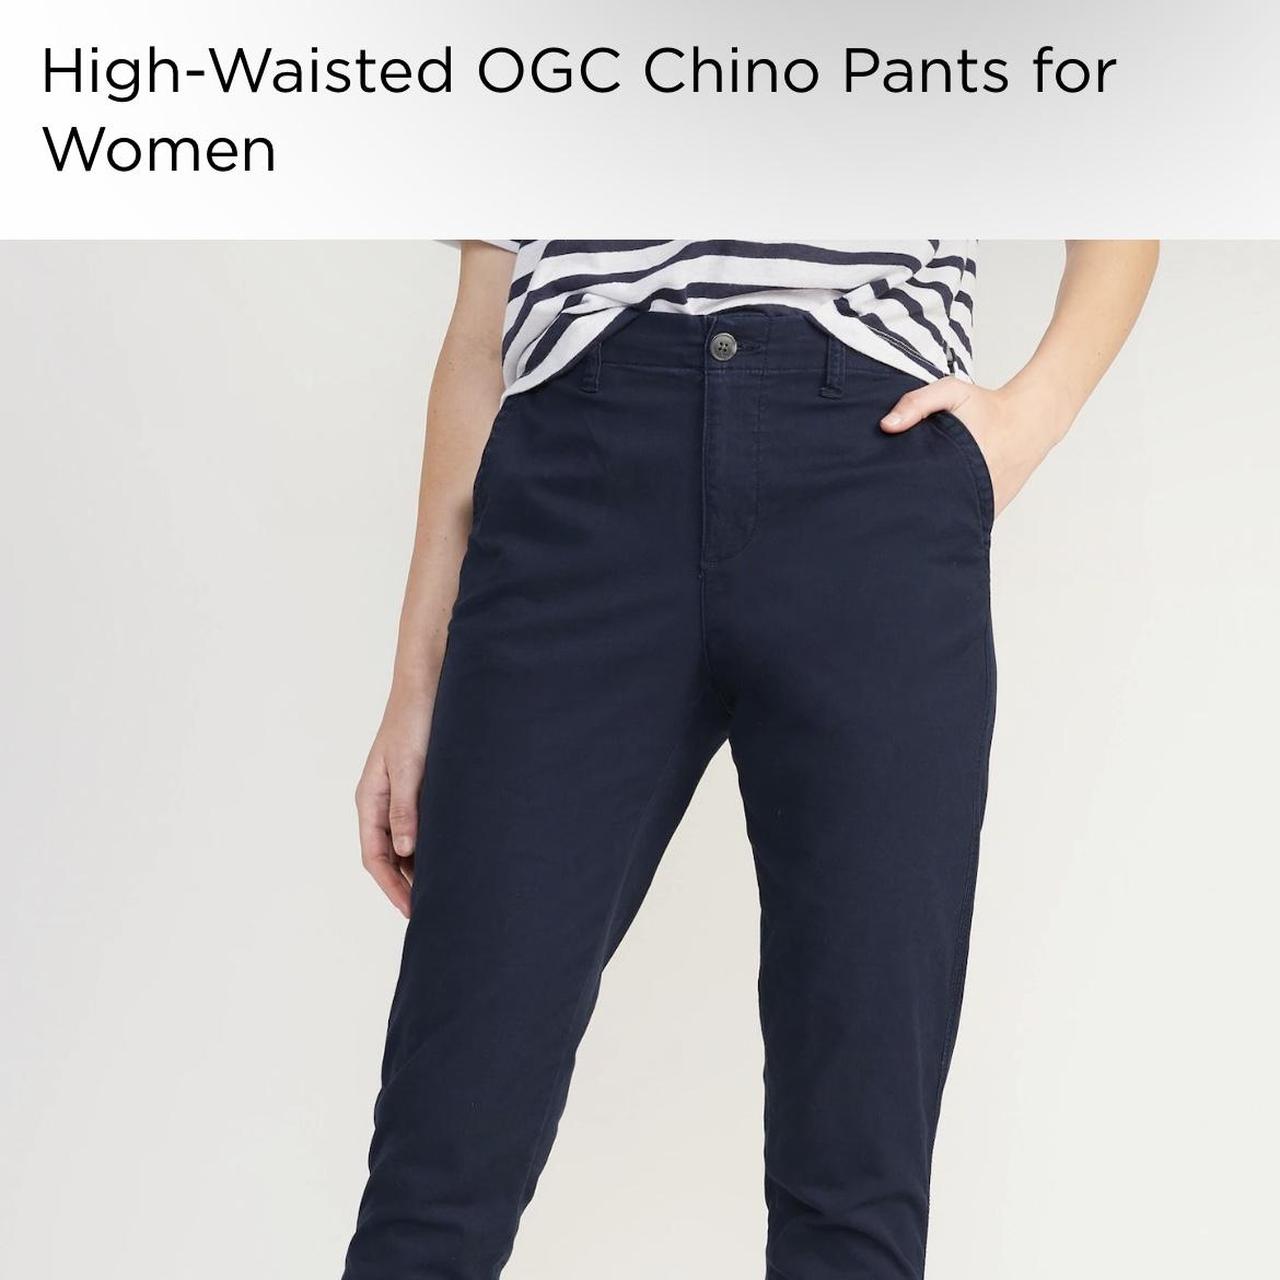 Old navy high waisted OGC chino pants for - Depop